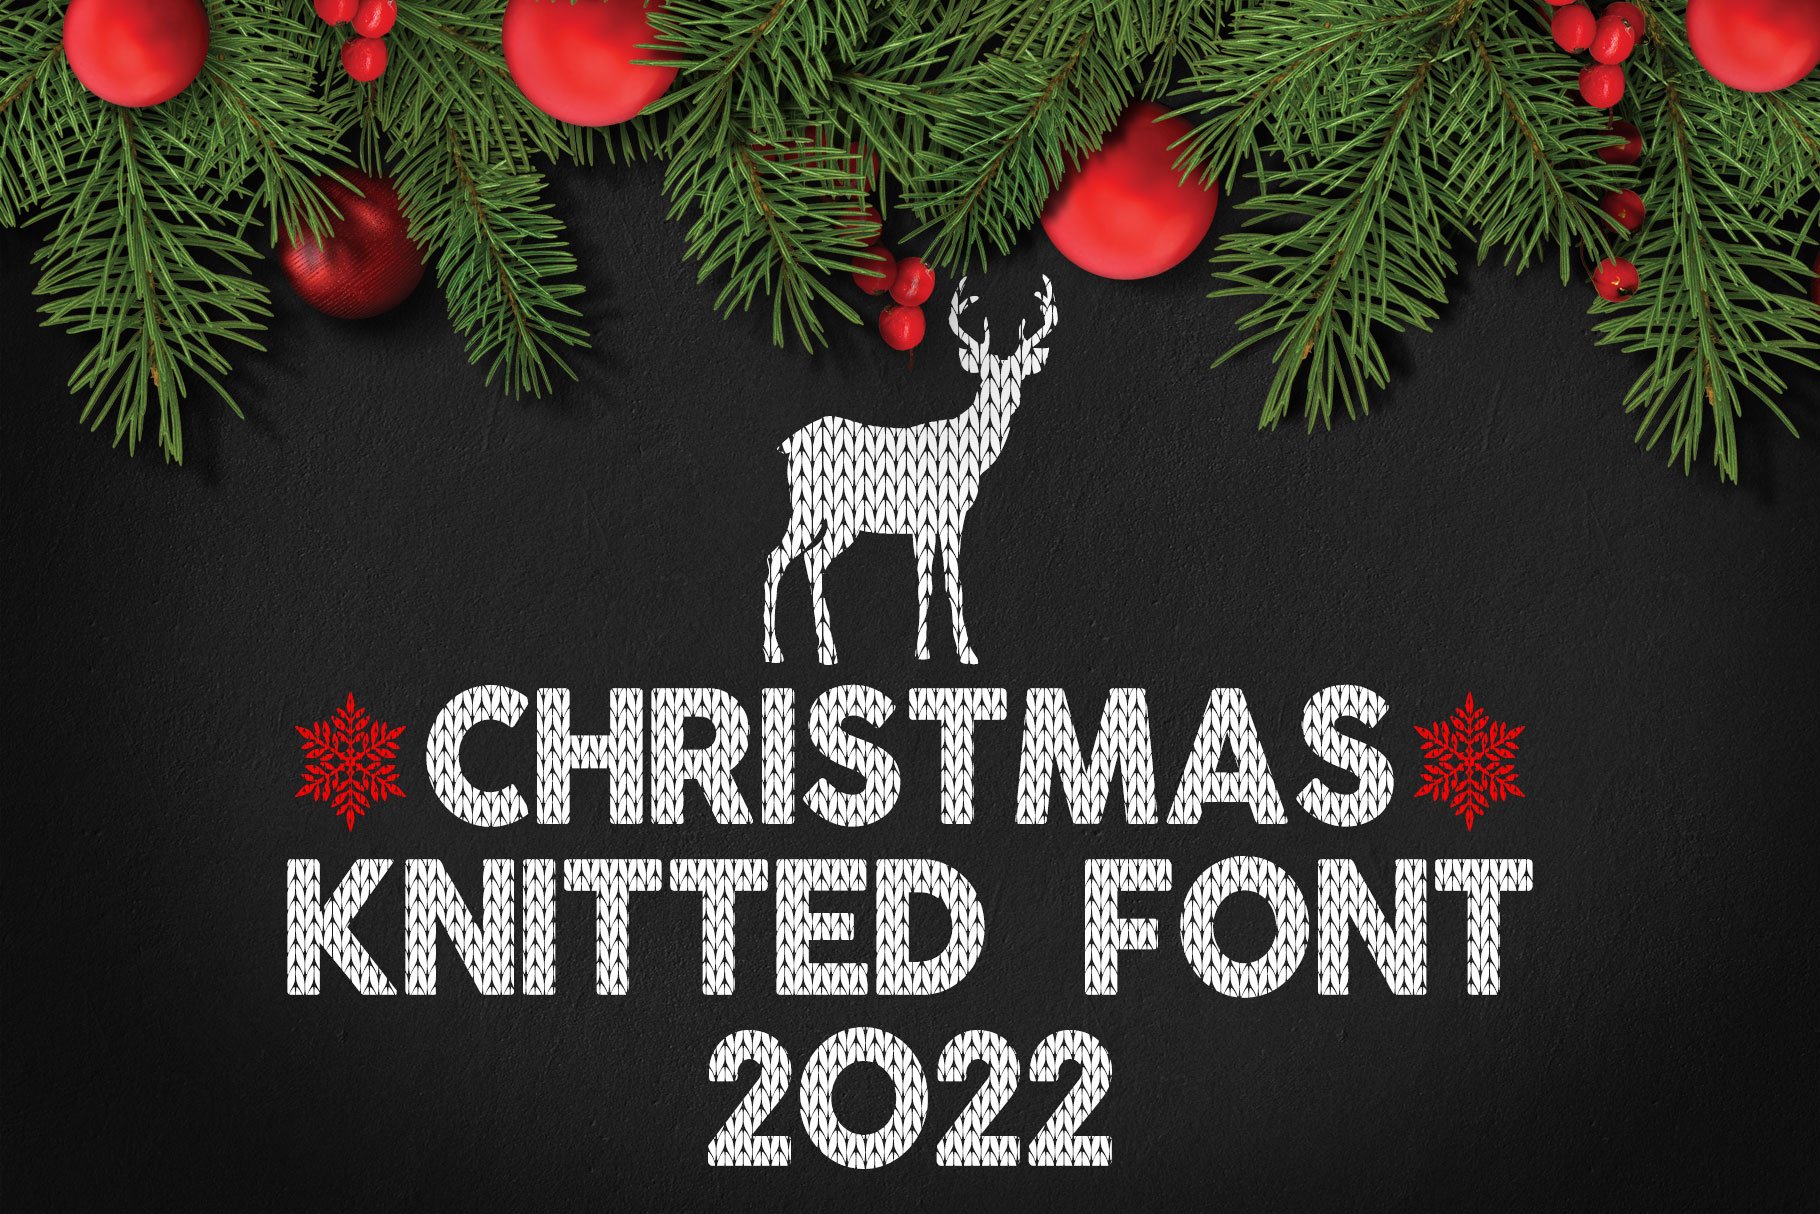 Christmas Knitted Font cover image.